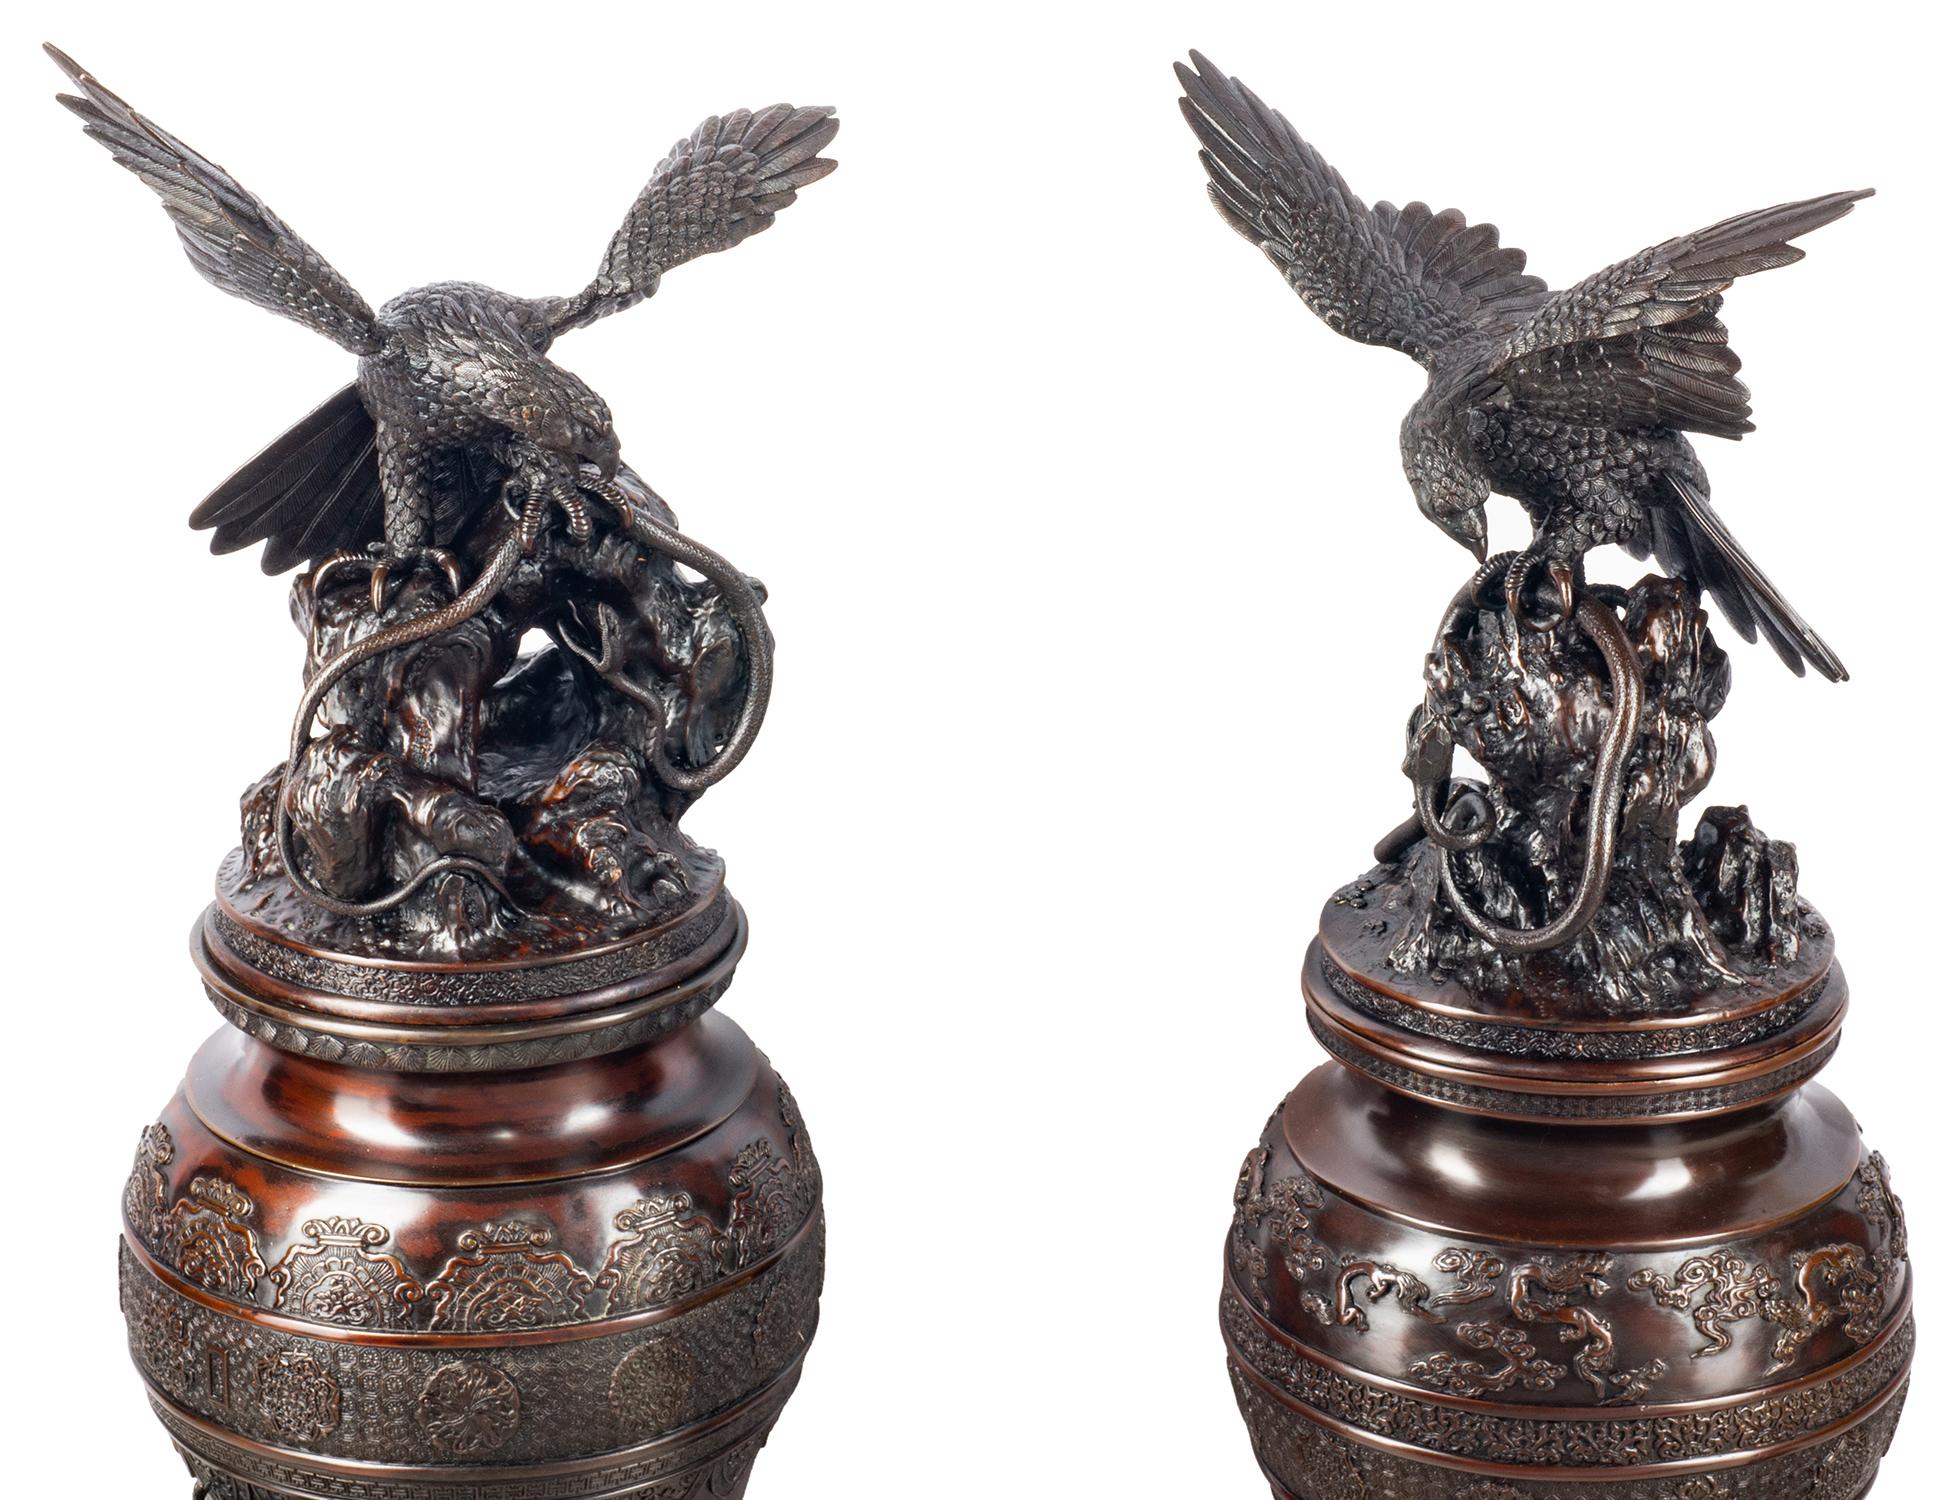 A spectacular pair of Japanese Meiji period (1868-1912) Bronze Koros, each lid having eagles hunting snakes on a rocky outcrop. The vases having classical Japanese motif decoration around, and supported two jovial priest like figures either side of